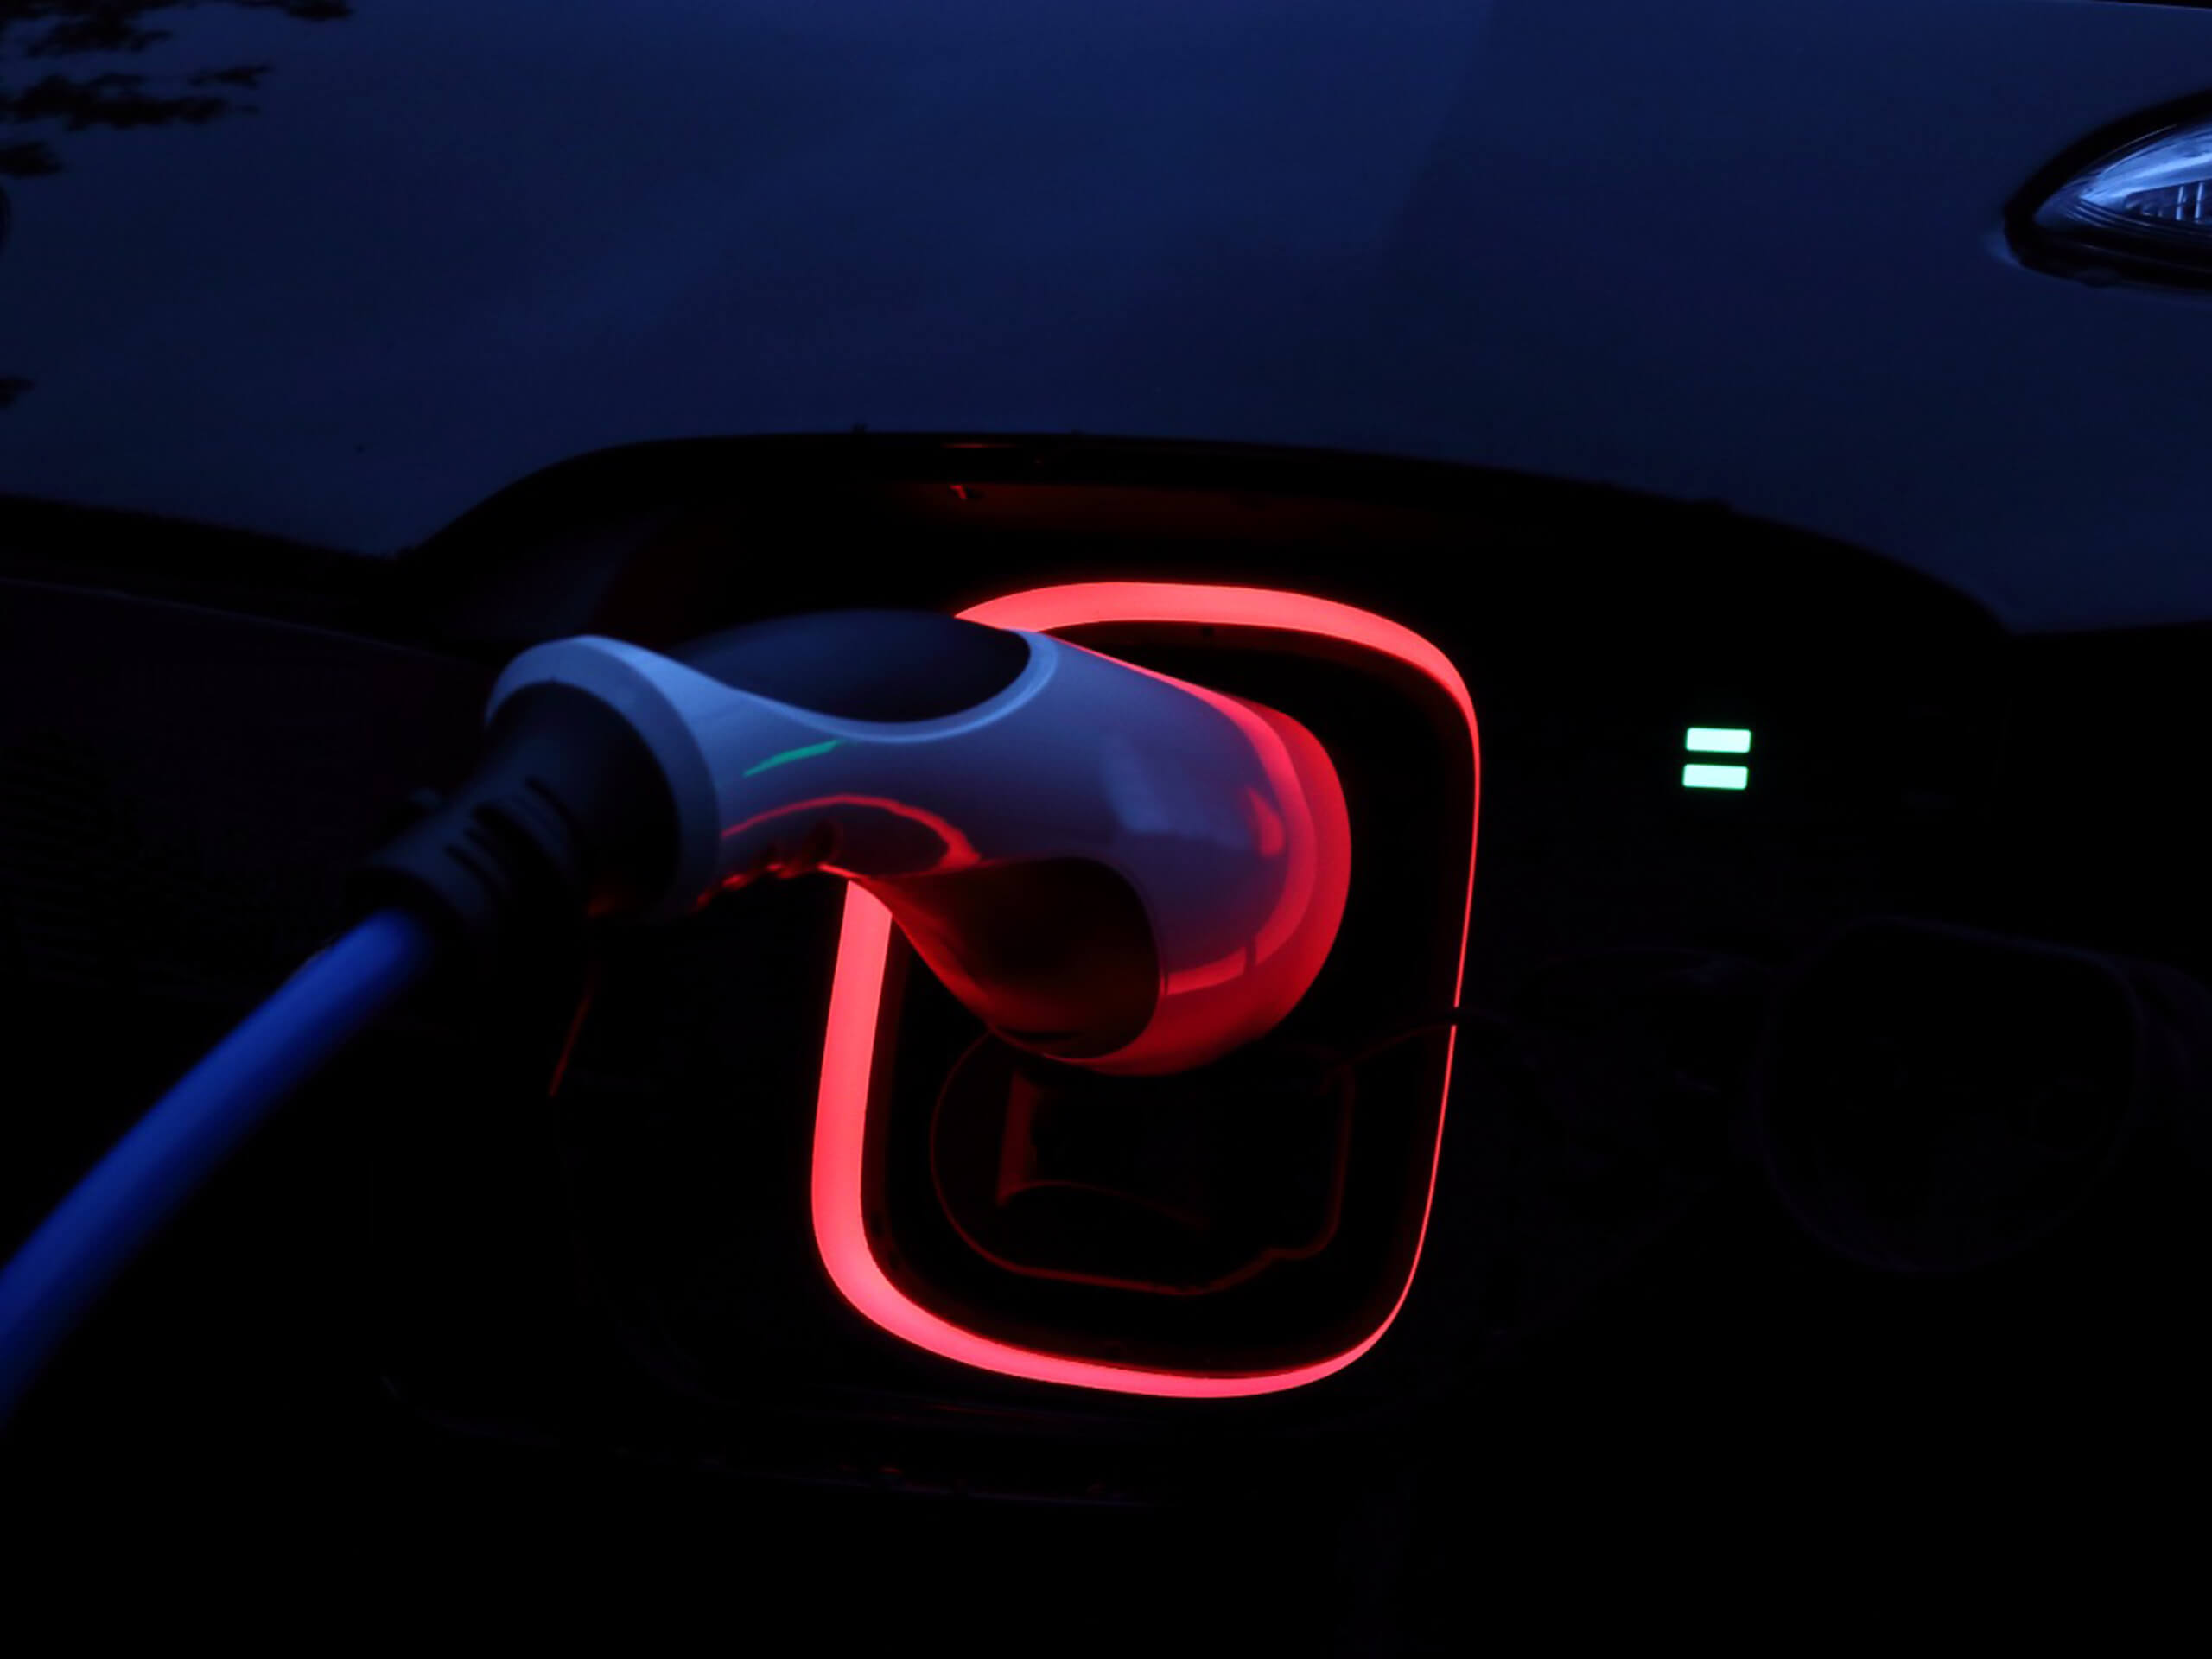 Closeup image of an electric vehicle plugged in and charging, illustrating the practicality of business energy resources.